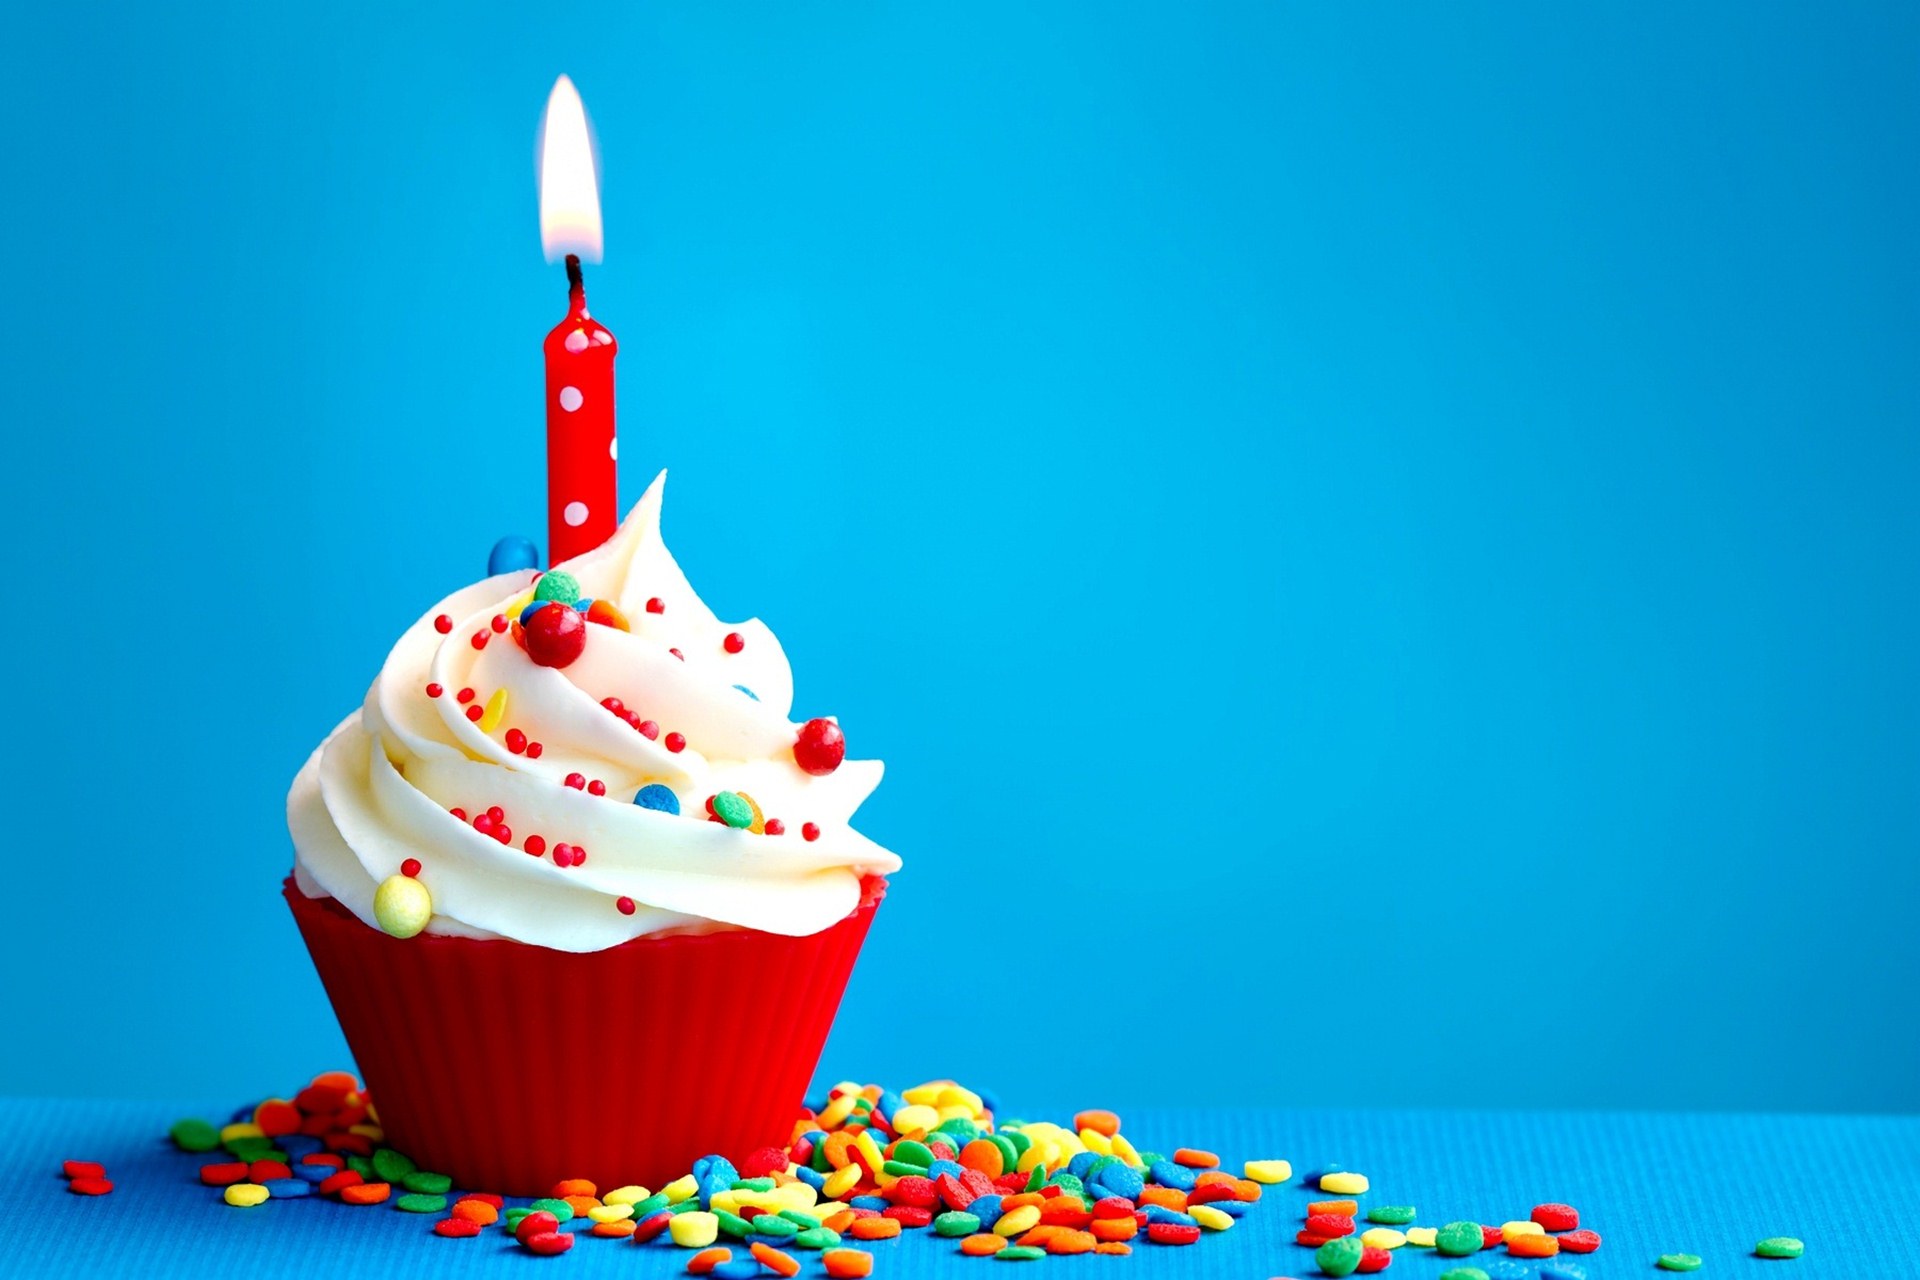 Happy Birthday on Cake with Balloon HD Wallpapers | HD Wallpapers